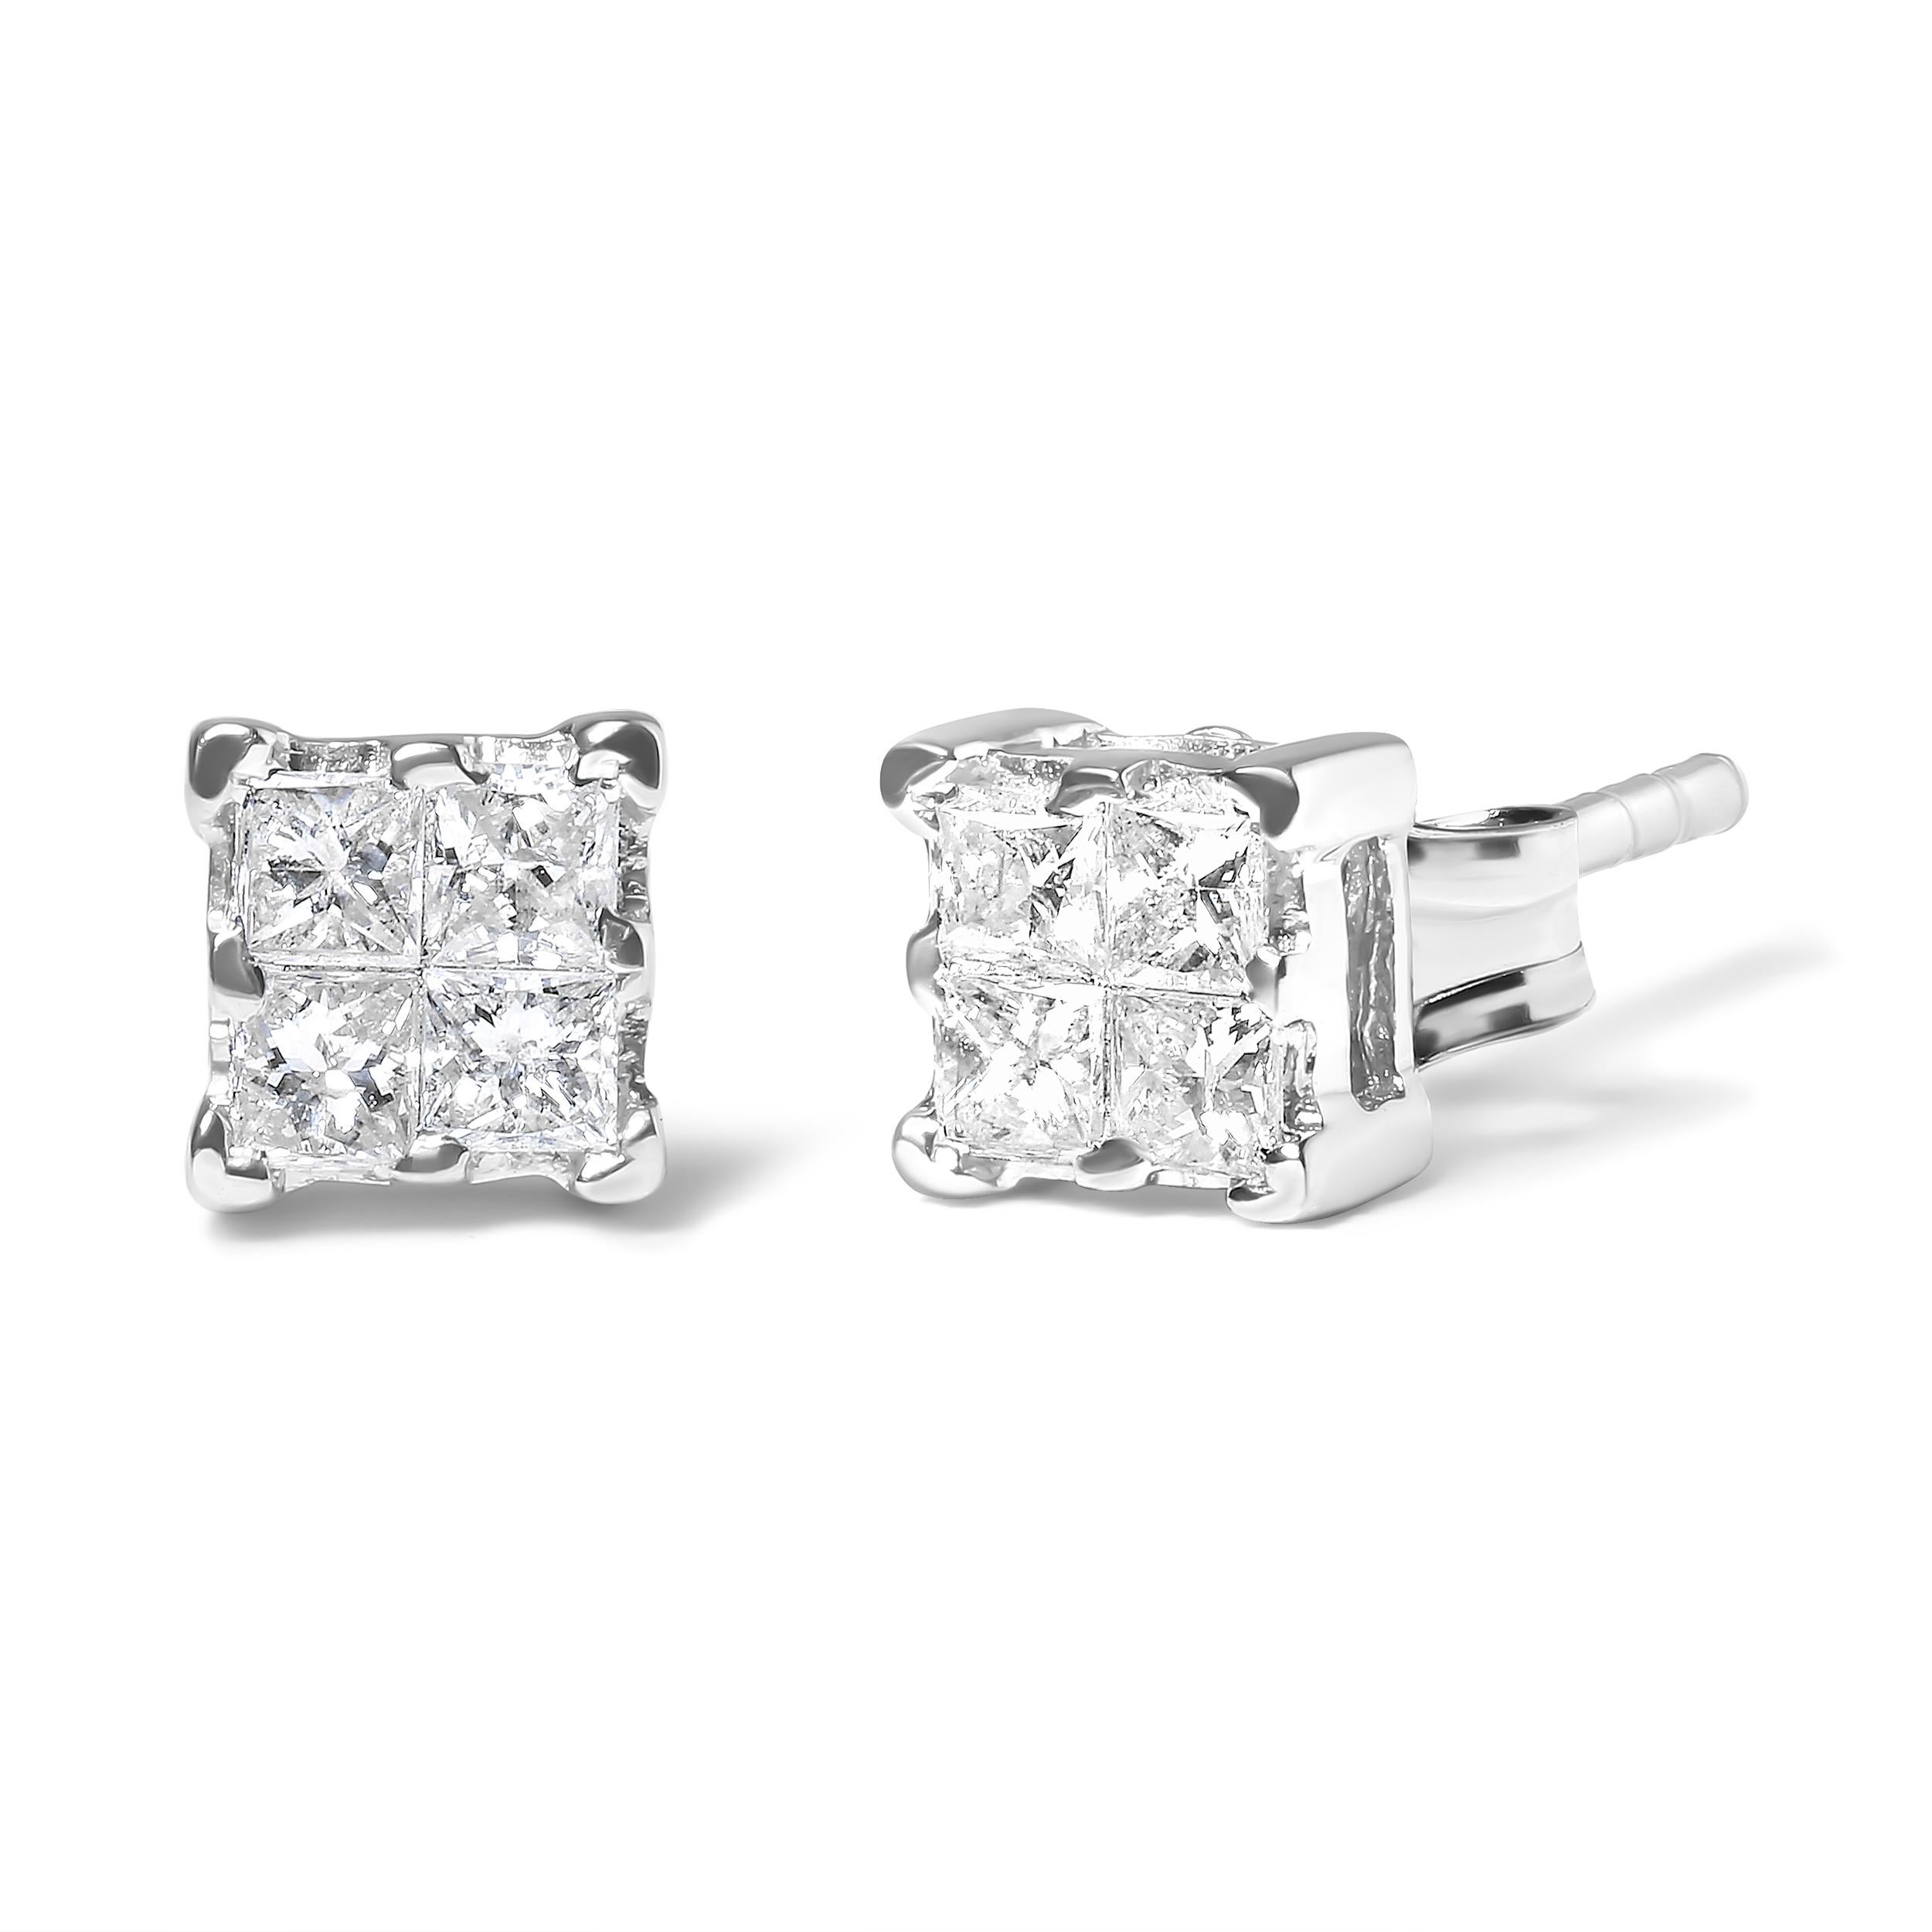 These composite designed earrings feature stunning, invisibly-set diamonds that enhance the size of the diamonds for a larger overall diamond look. Revealing a quad of four princess cut diamonds on each stud, these earrings are perfect for everyday